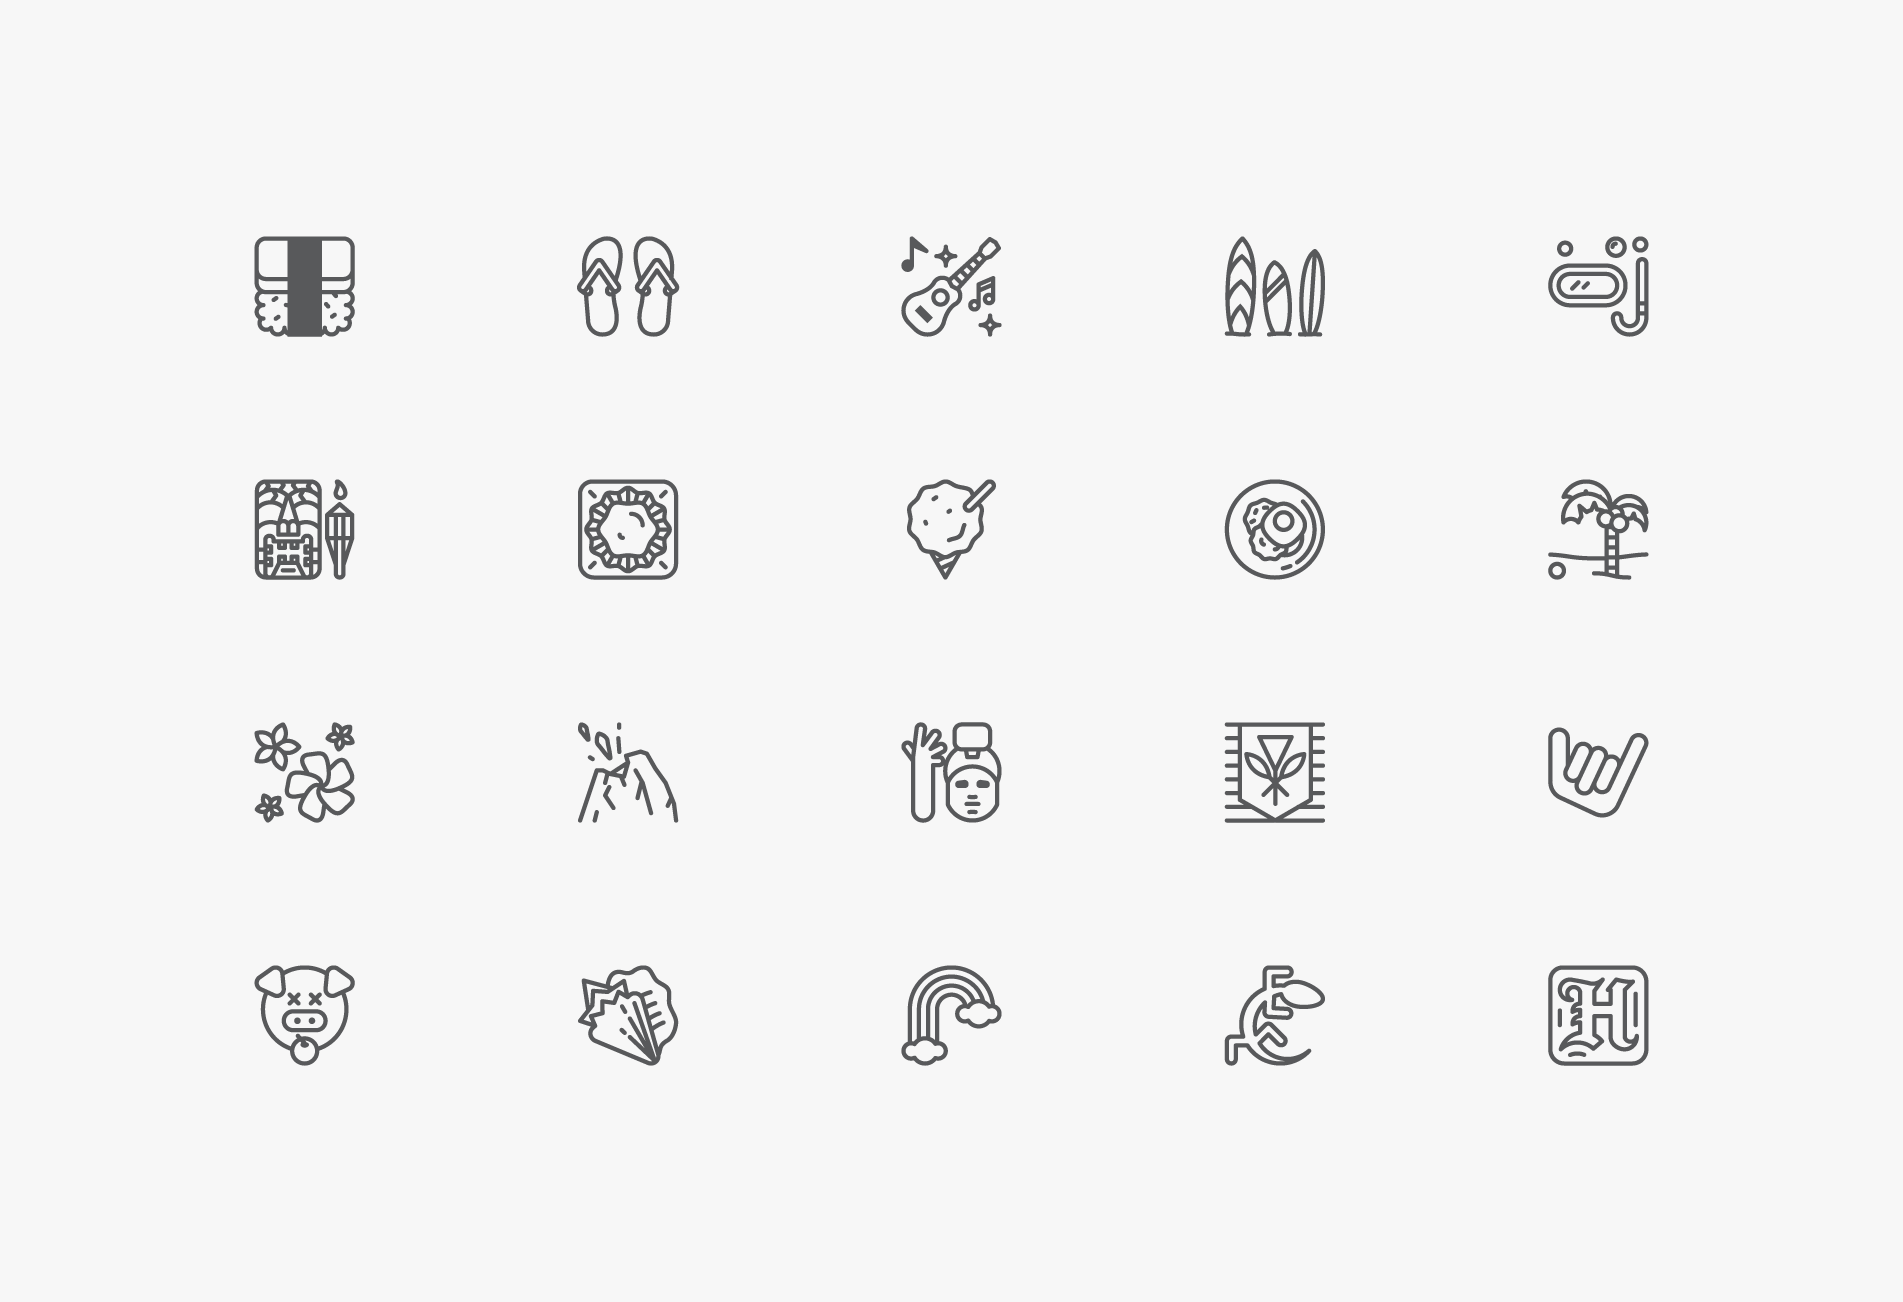 Download these icons at The Noun Project.